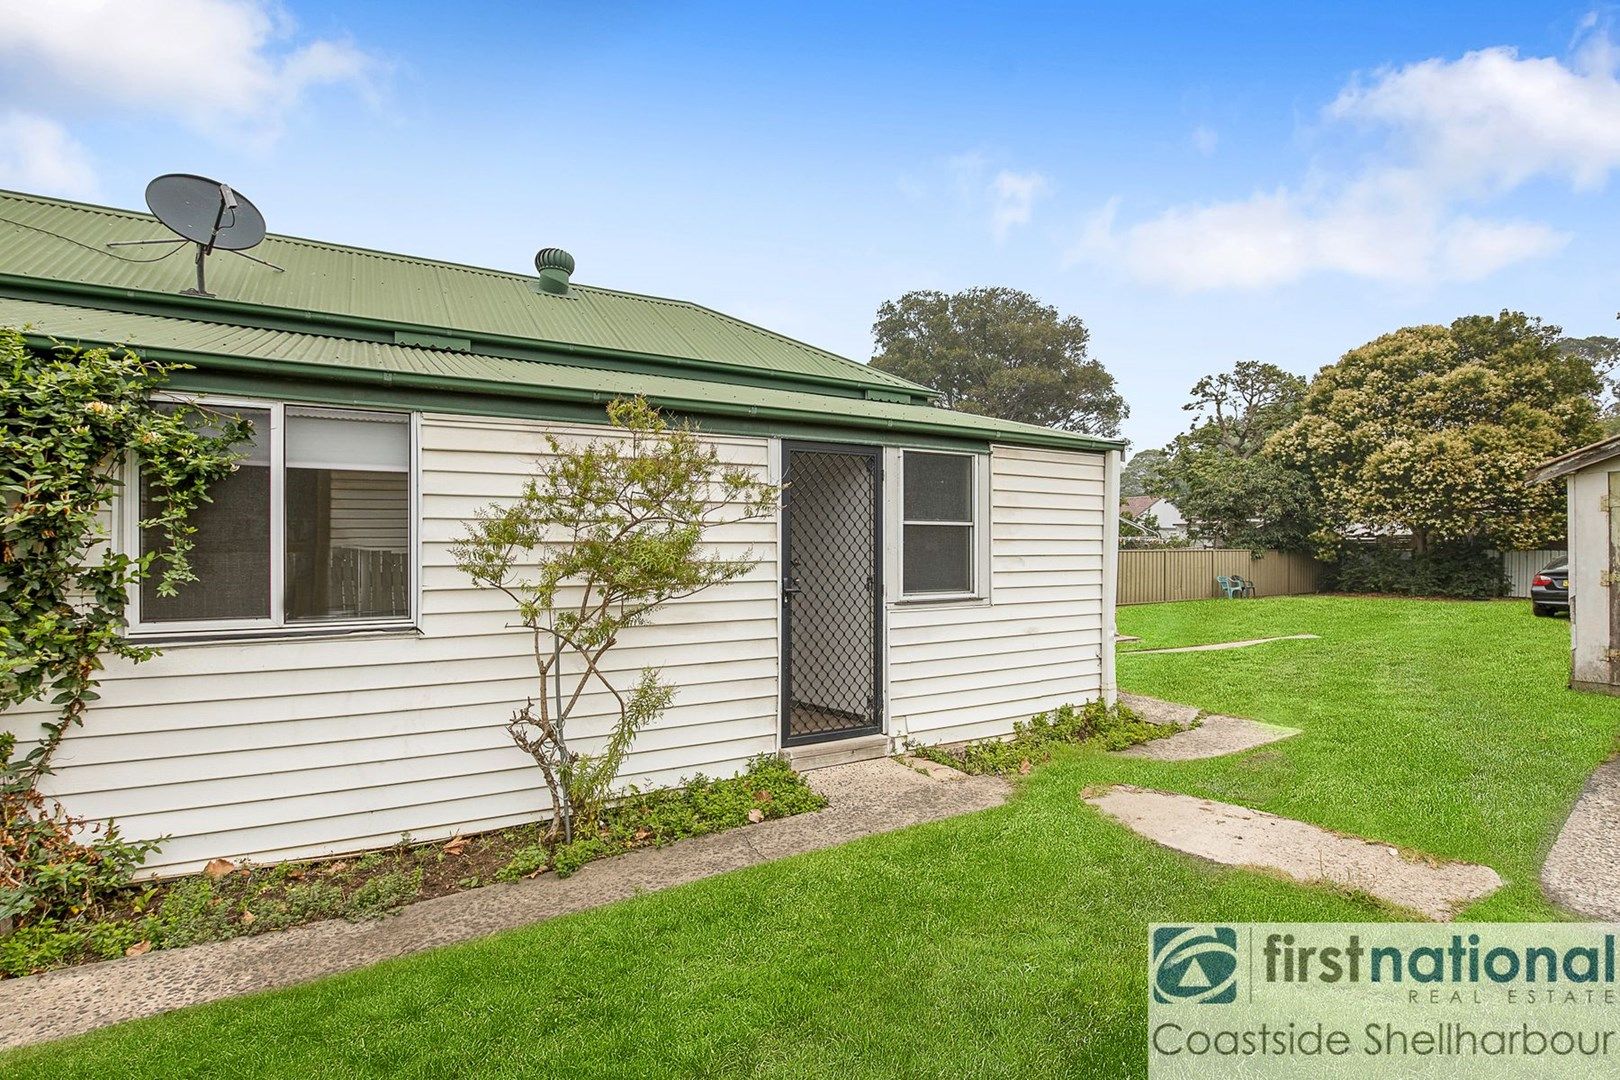 1/12 Princes Highway, Figtree NSW 2525, Image 0